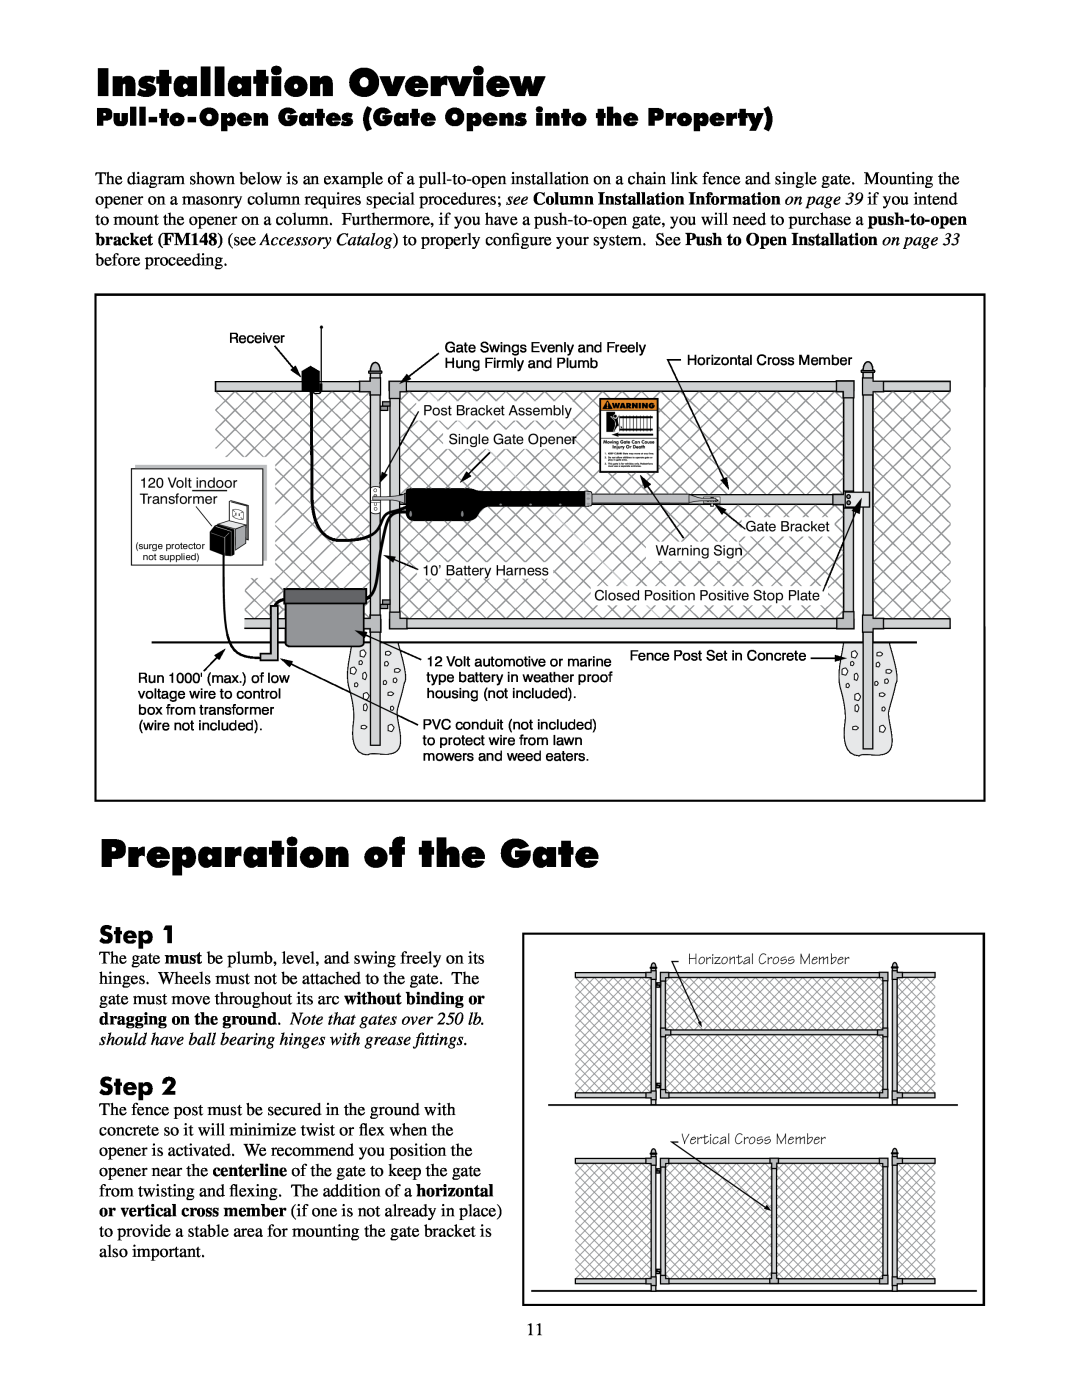 GTO UL325 SERIES Installation Overview, Preparation of the Gate, Pull-to-Open Gates Gate Opens into the Property, Step 